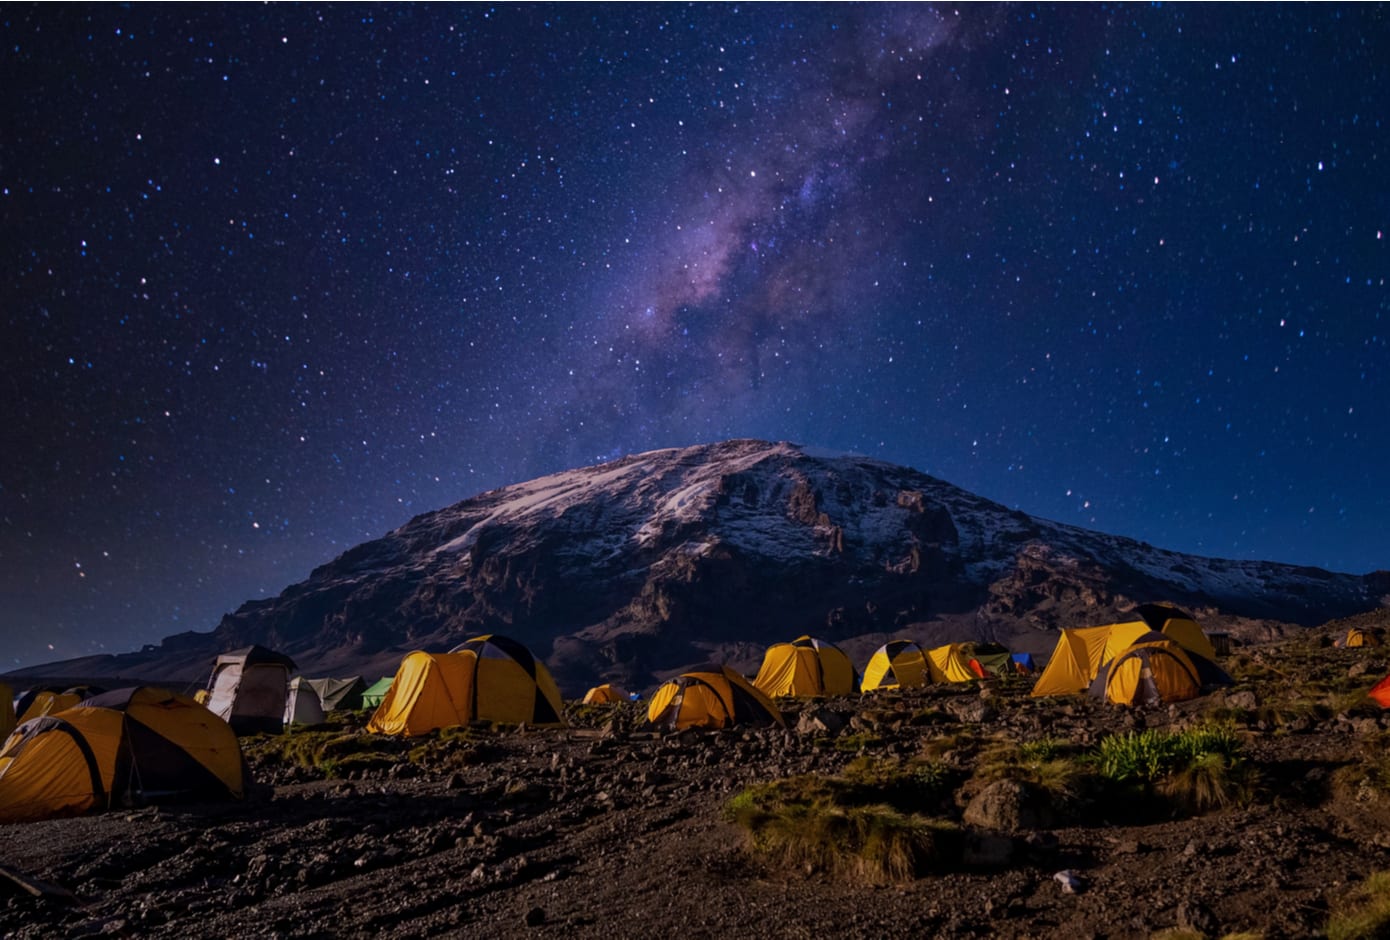 Night view of the milky way over mount Kilimanjaro, Tanzania with many tents at the base camp.